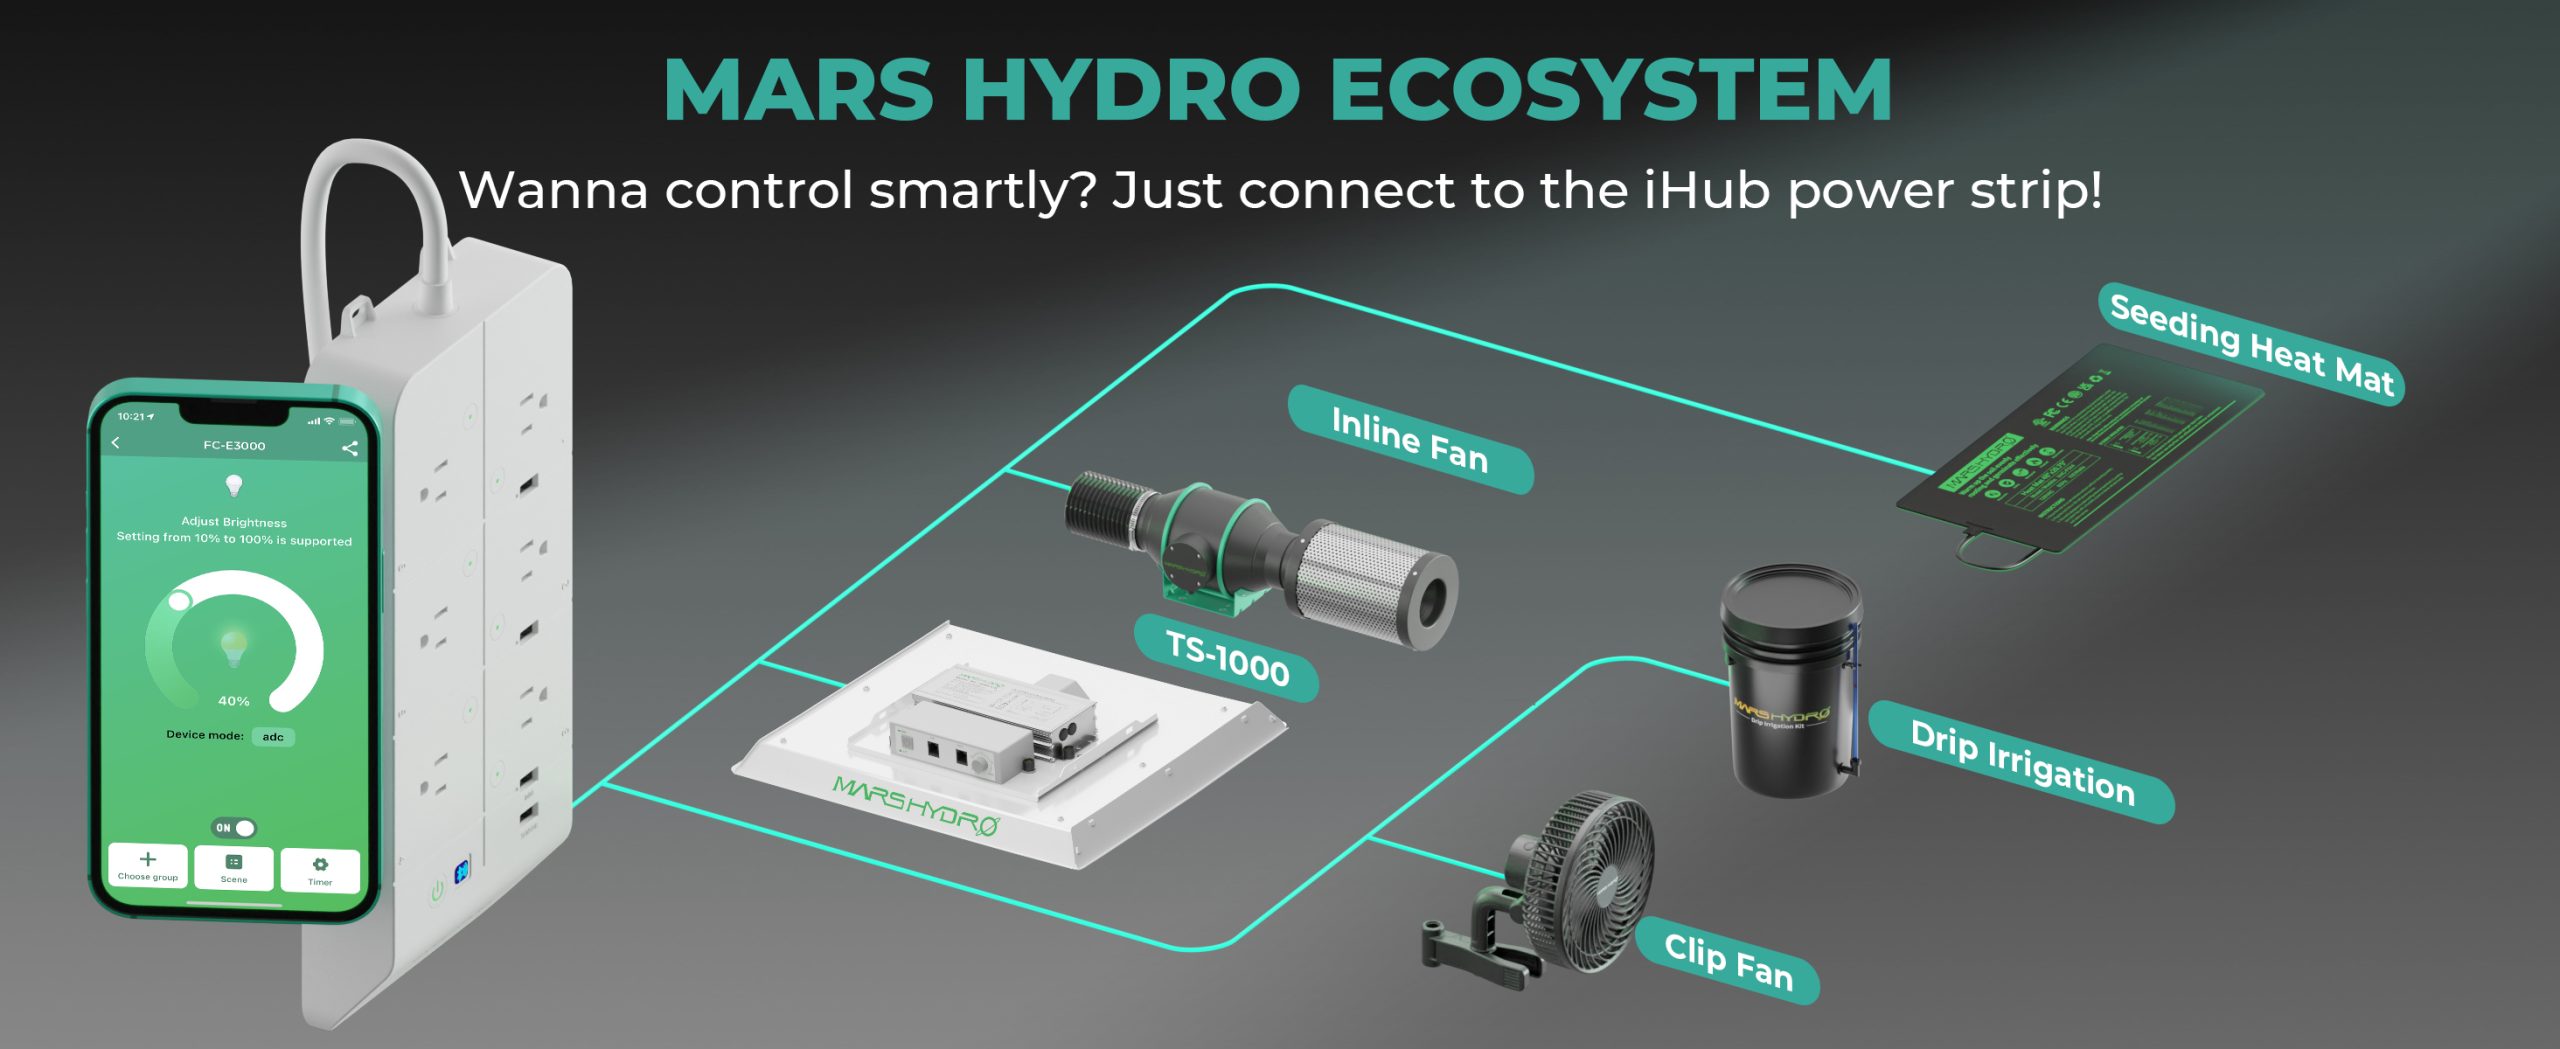 MARS-HYDRO-ECO-SYSTEM-Wanna-control-smartly-Just-connect-to-the-iHub-power-strip-scaled.jpg